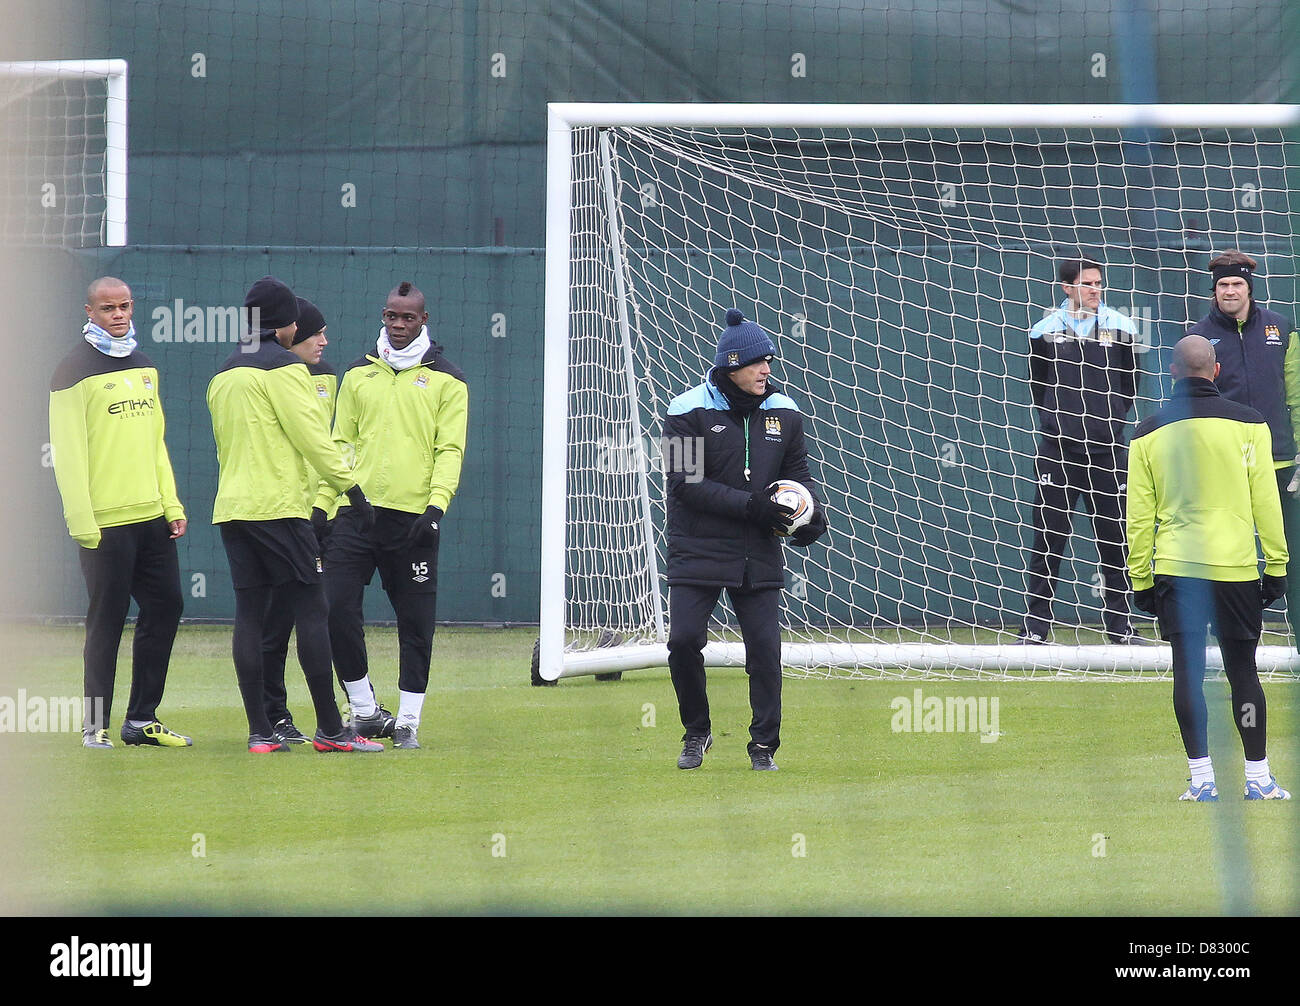 Mario Balotelli and Roberto Mancini Manchester City F.C at their training ground in Manchester Manchester, England - 14.02.12 Stock Photo